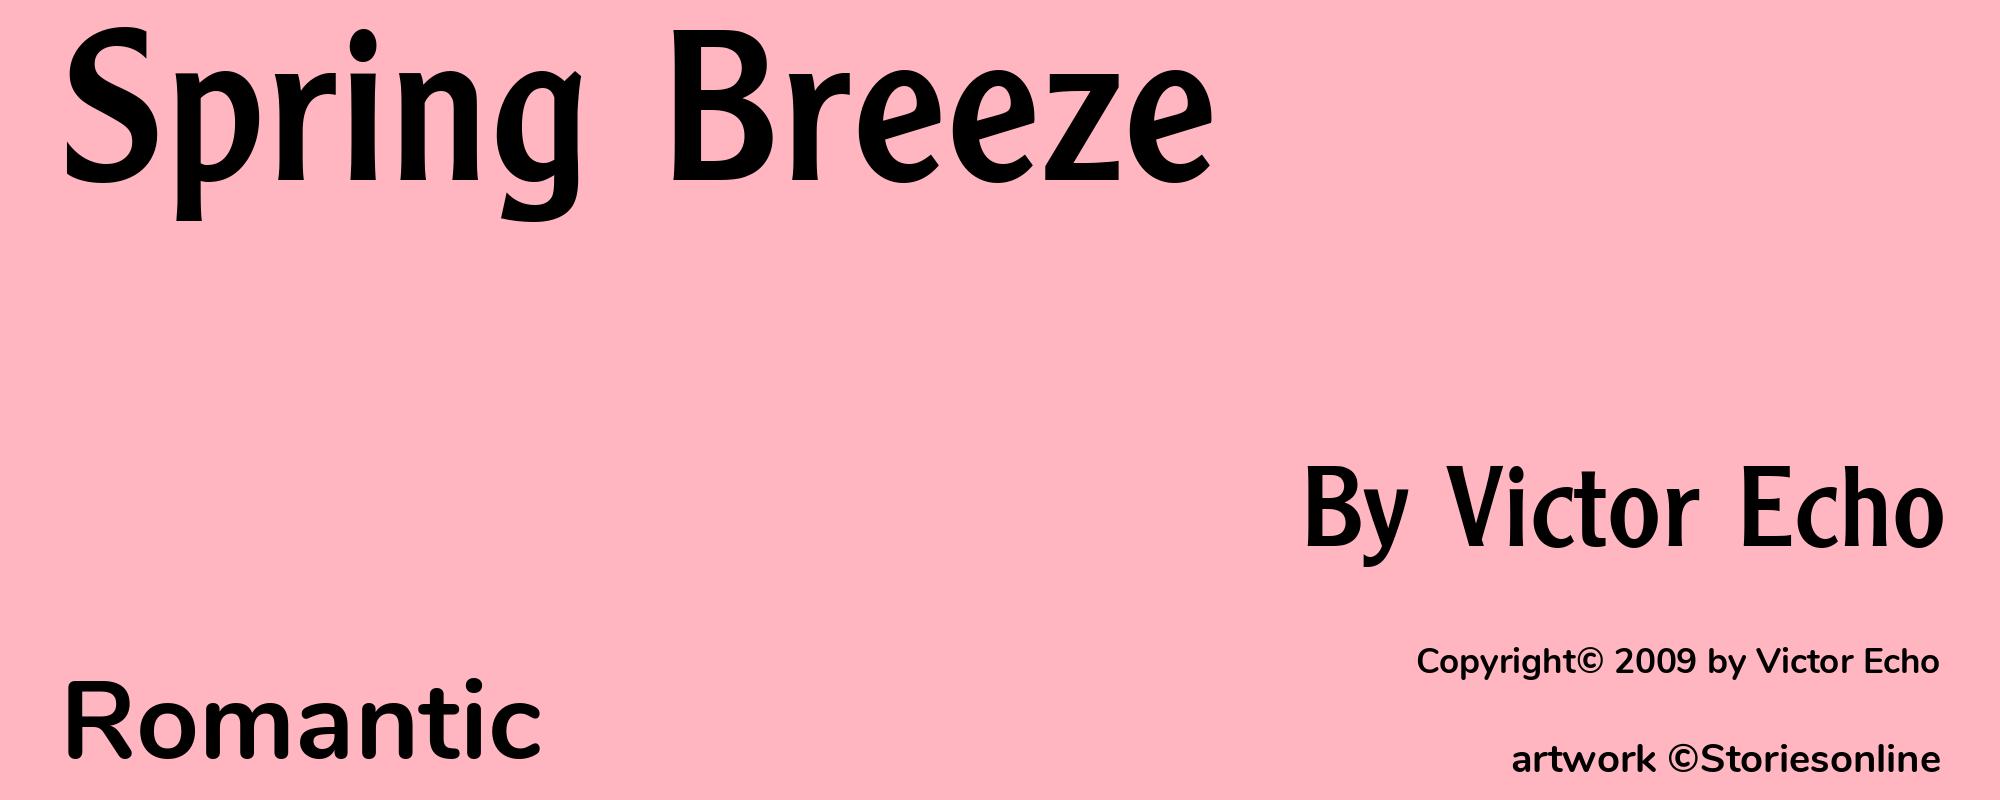 Spring Breeze - Cover